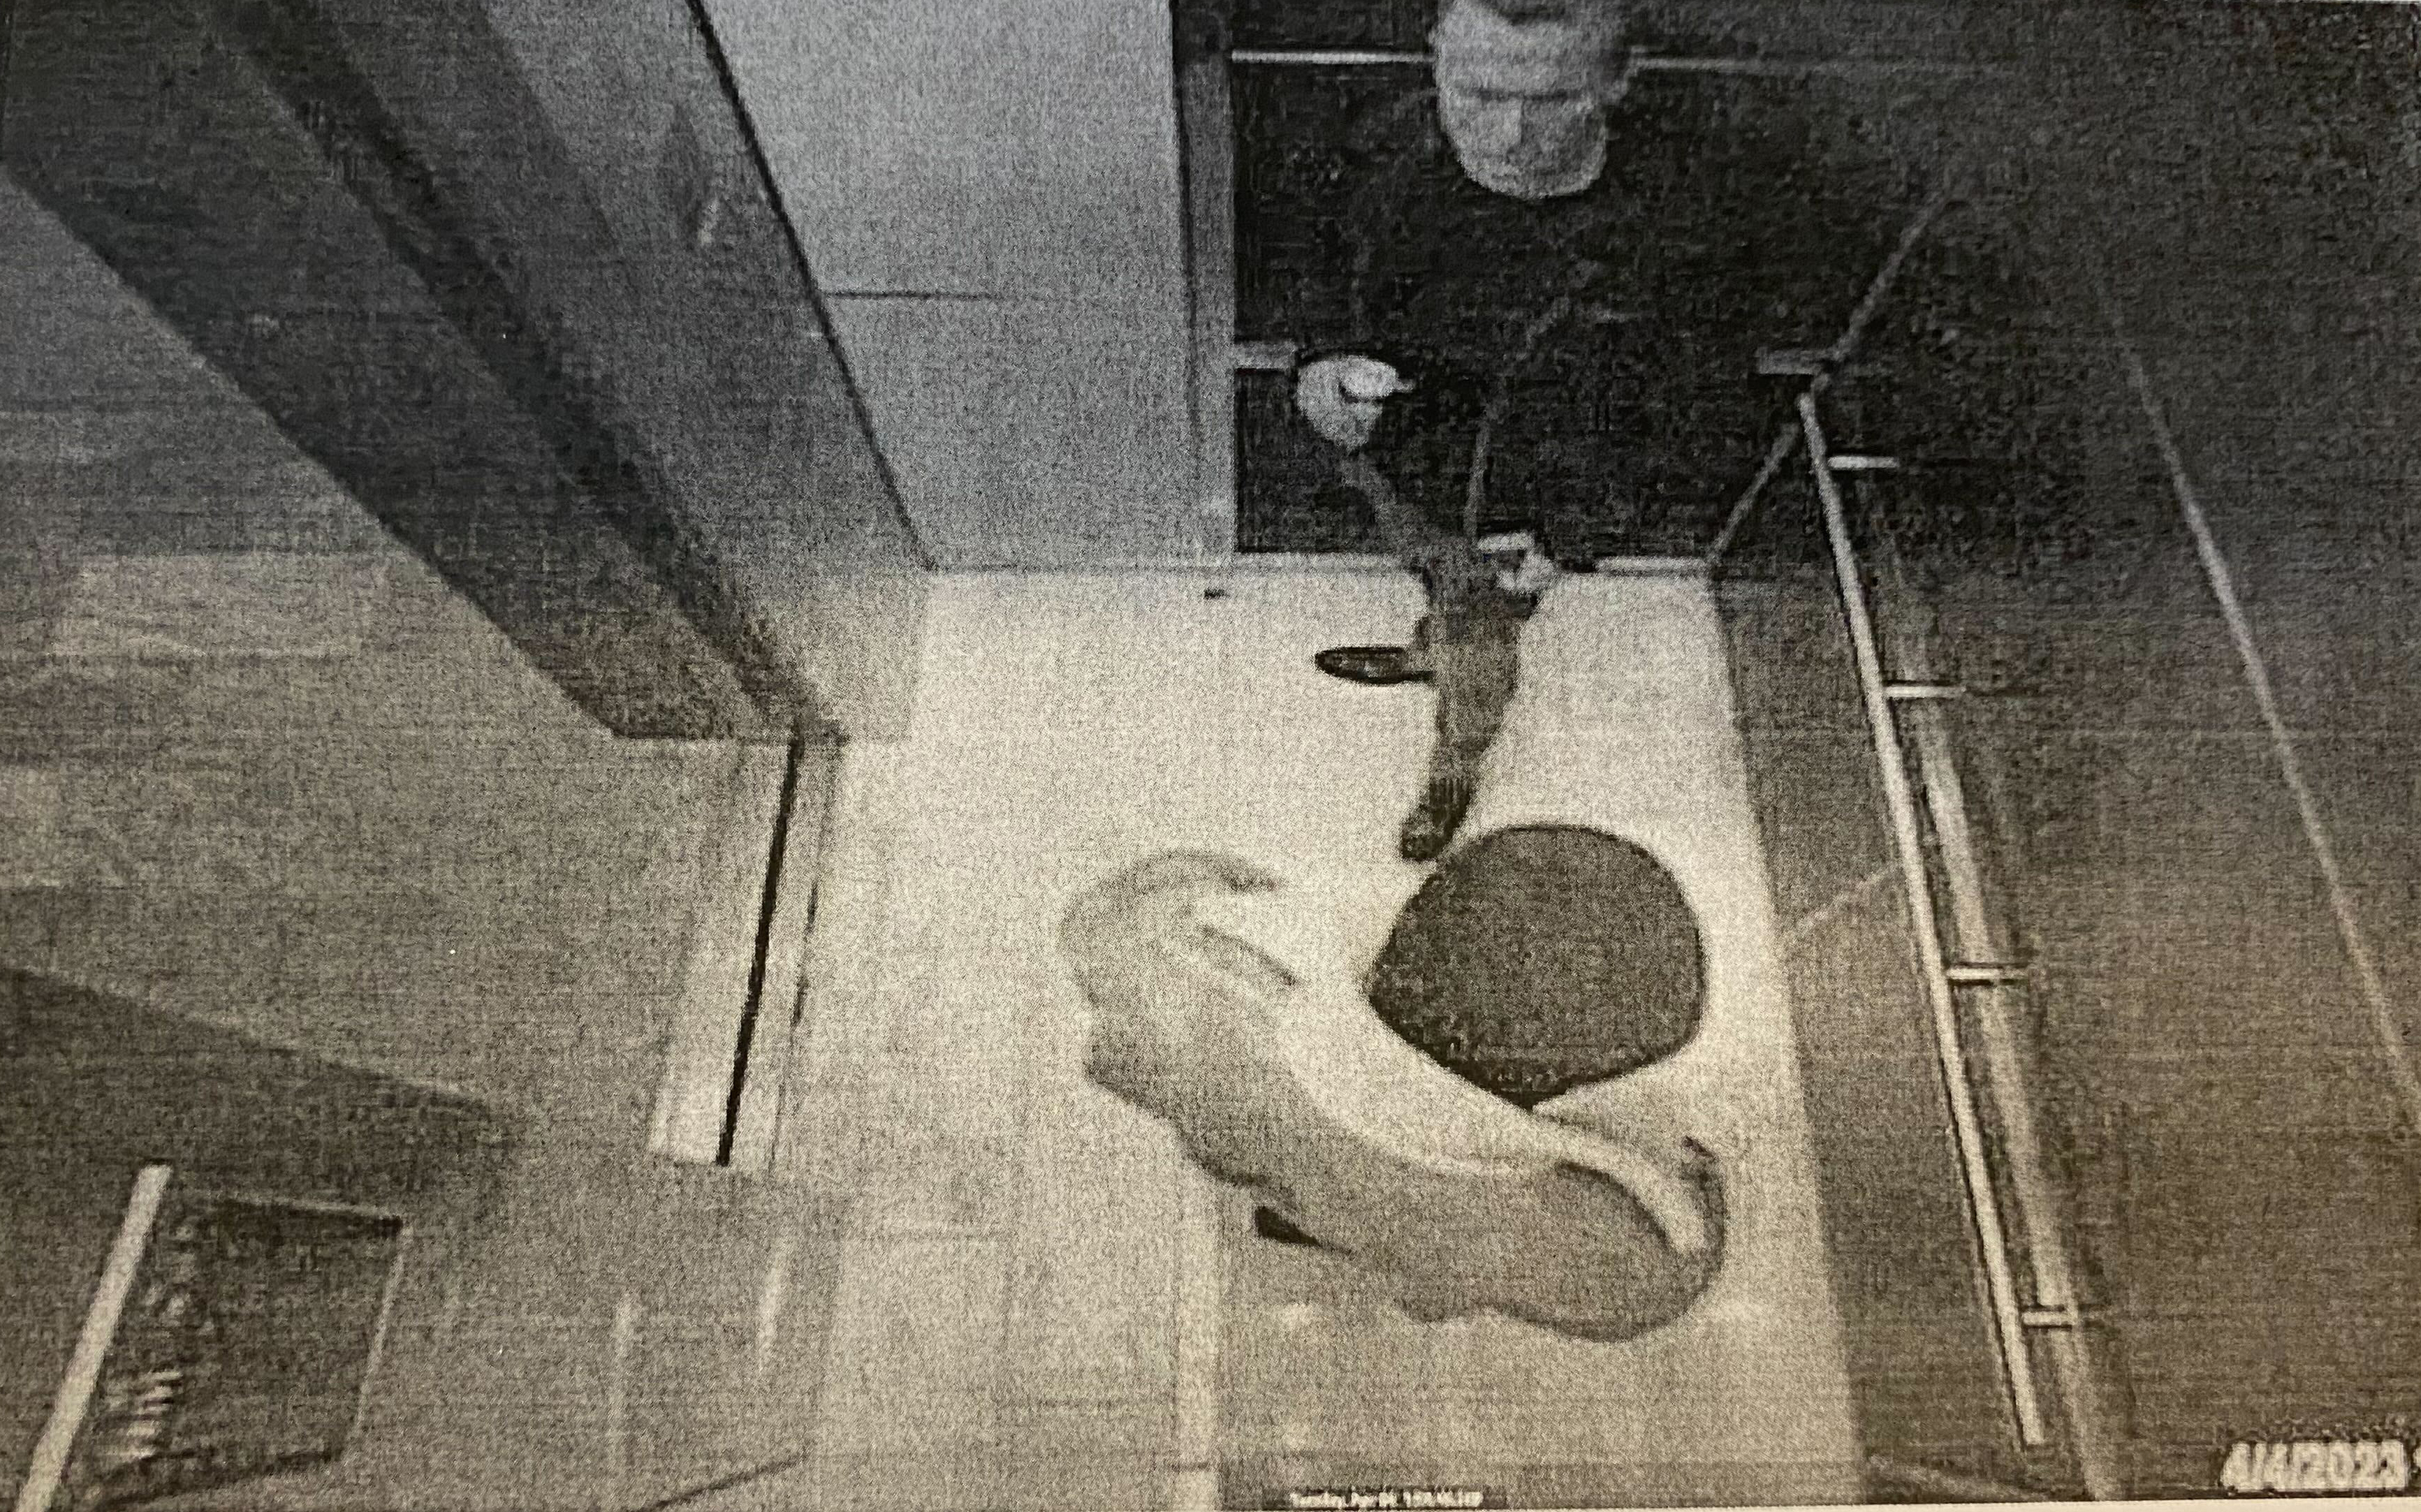 Surveillance photo of two men in an elevator. 